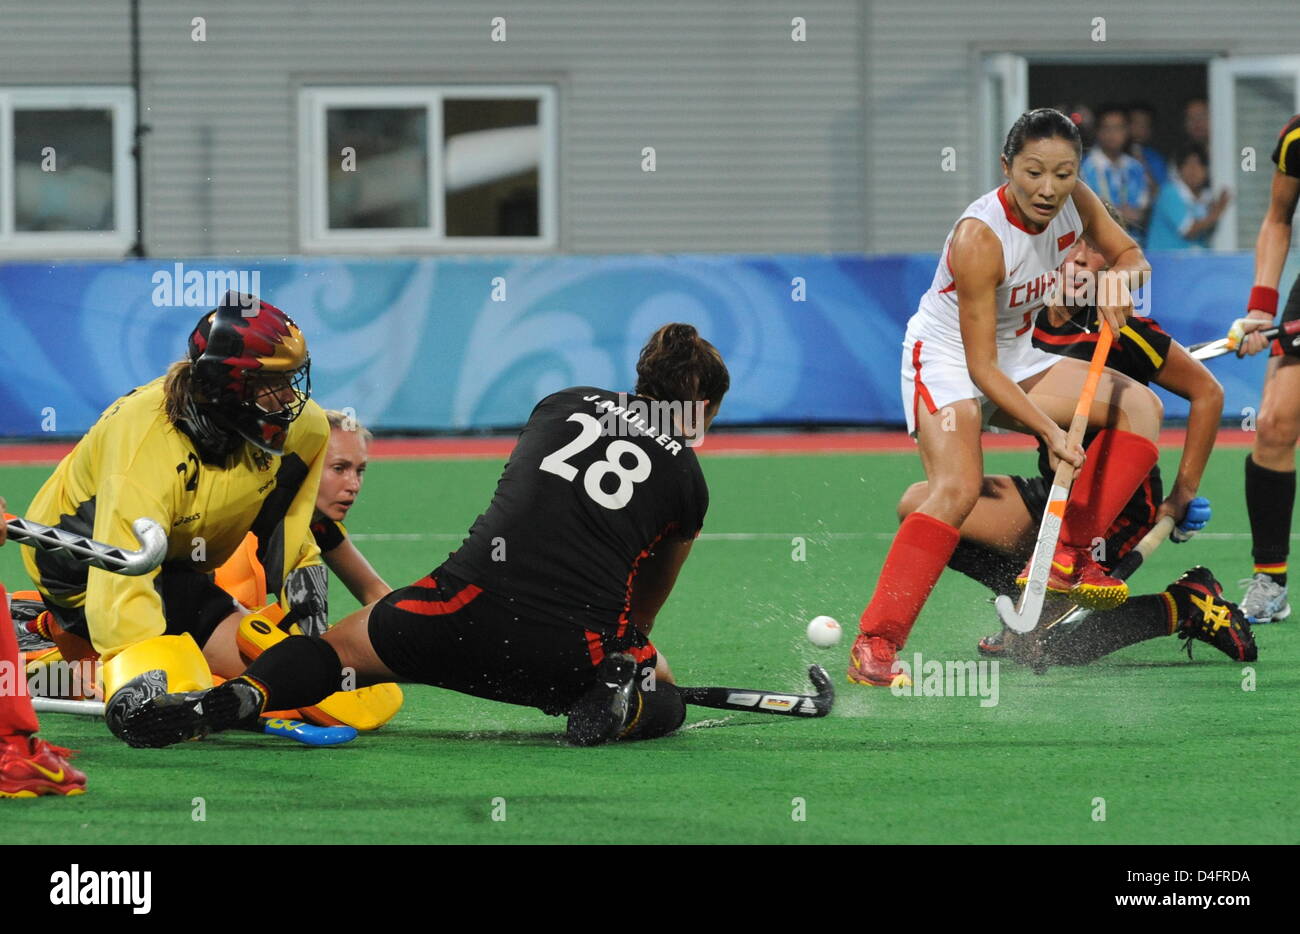 Cheng Hui (R) of China vies against Germany's Julia Mueller (2-L) and goalkeeper Kristina Reynolds during the Semifinal match Germany against China in the womenÒs Field Hockey competition at the Beijing 2008 Olympic Games, Beijing, China, 20 August 2008. Photo: Peer Grimm ###dpa### Stock Photo